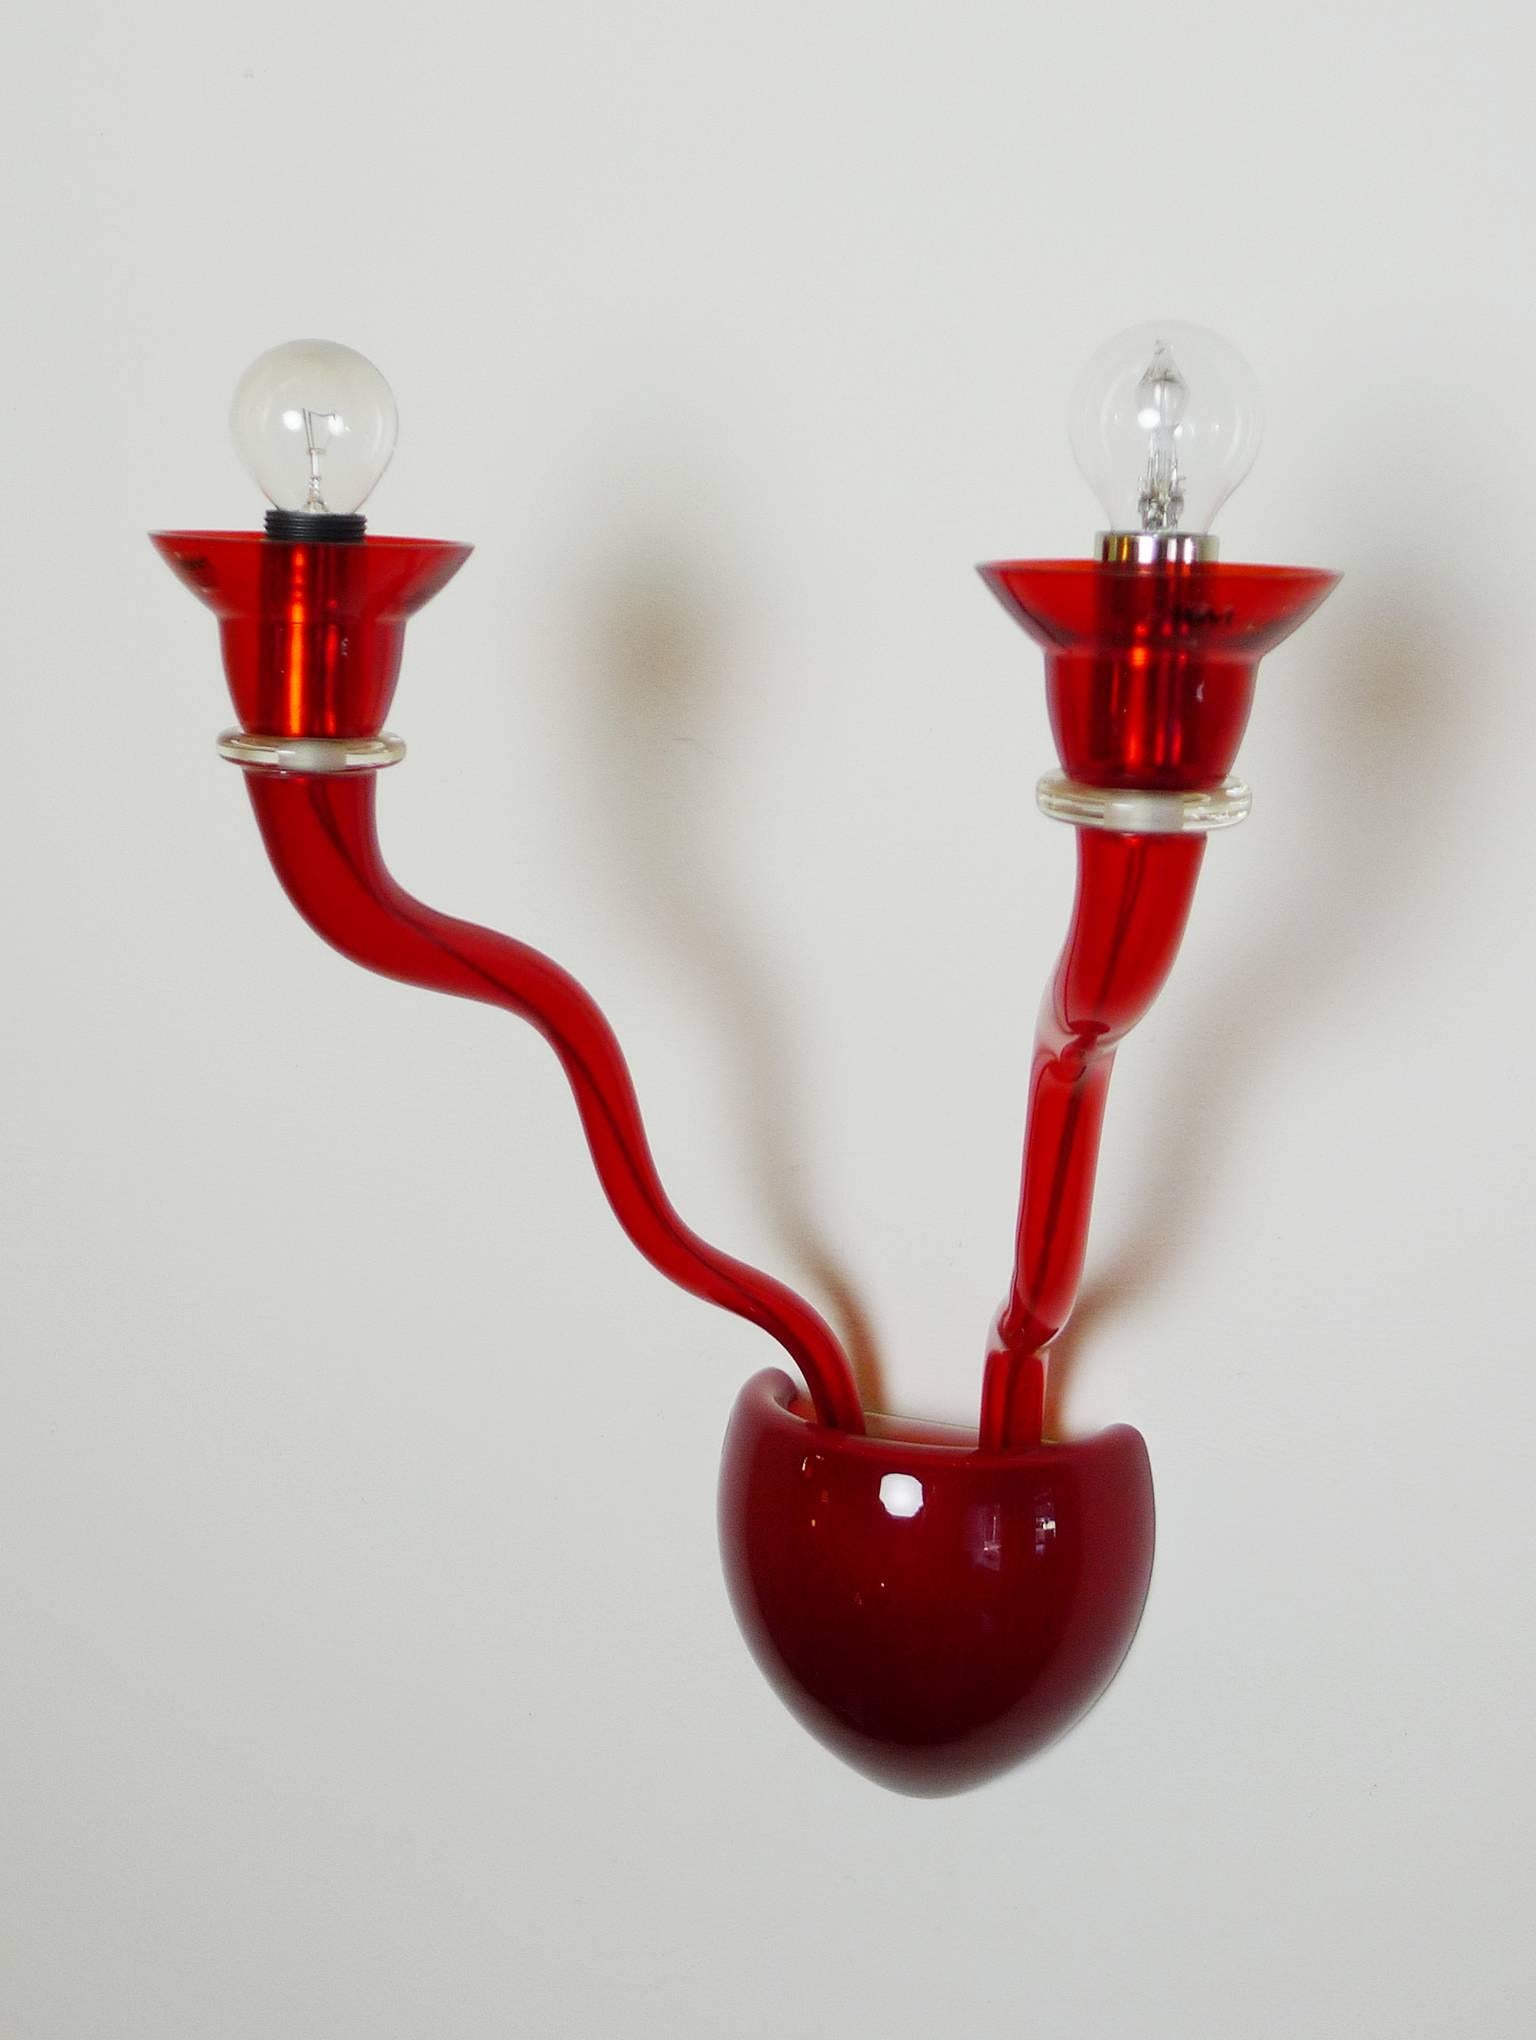 This sconce with hand-blown Murano glass from VeArt was designed by Örni Halloween for Artemide in 1992. Örni Halloween is the Alias of Ernesto Gismondi, who was the founder of Artemide and also one of the famous Italian Memphis Designer. In terms